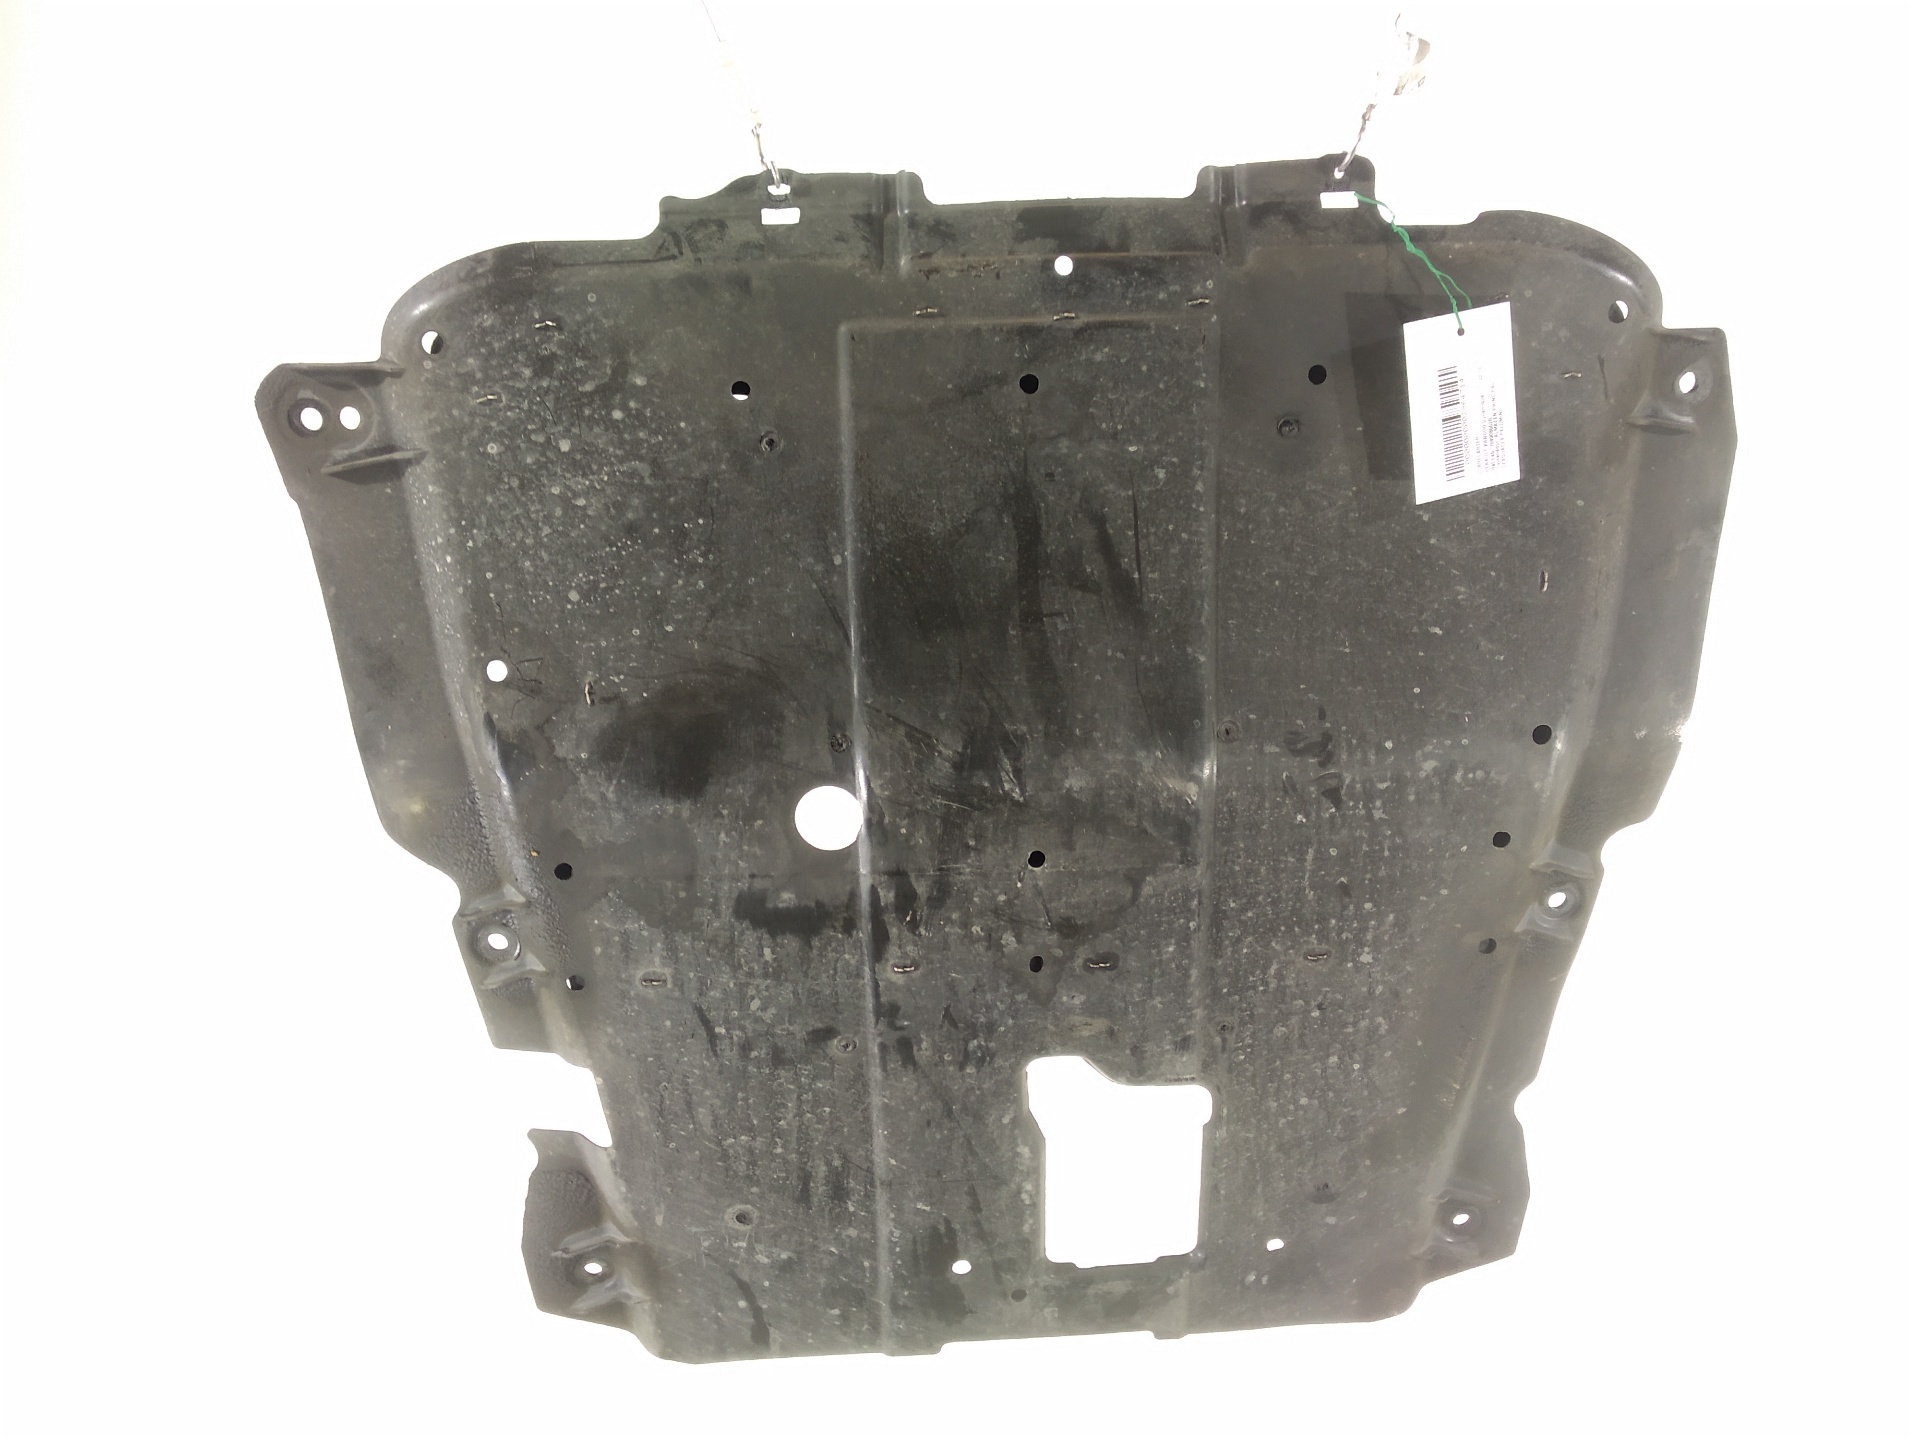 RENAULT Kangoo 2 generation (2007-2021) Front Engine Cover 758908552R, 758908552R, 758908552R 24512255